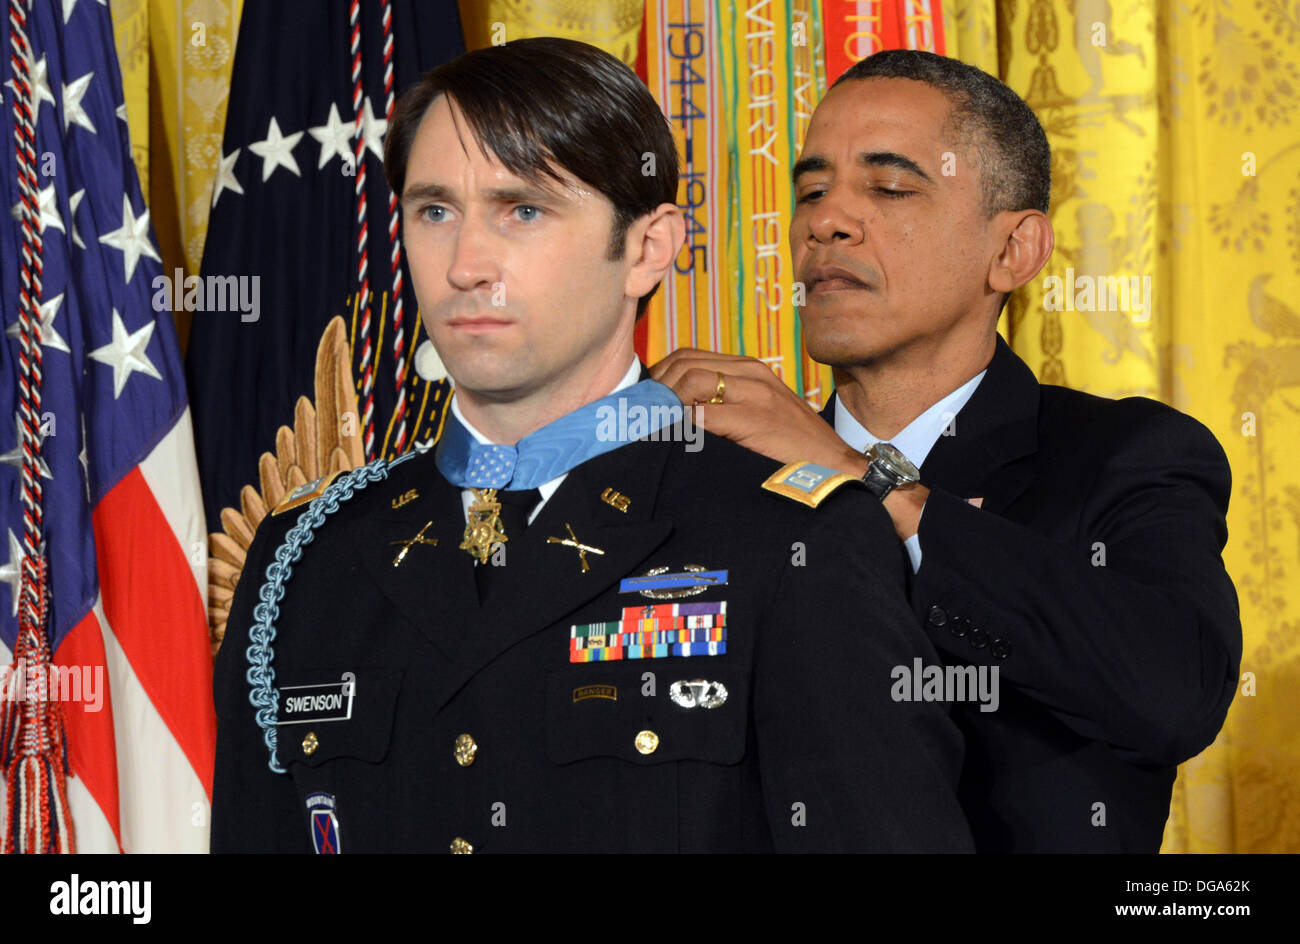 US President Barack Obama presents former Army Capt. William D. Swenson with the Medal of Honor during a ceremony in the East Room of the White House October 15, 2013 in Washington, DC. The Medal of Honor is the nation's highest military honor. Stock Photo